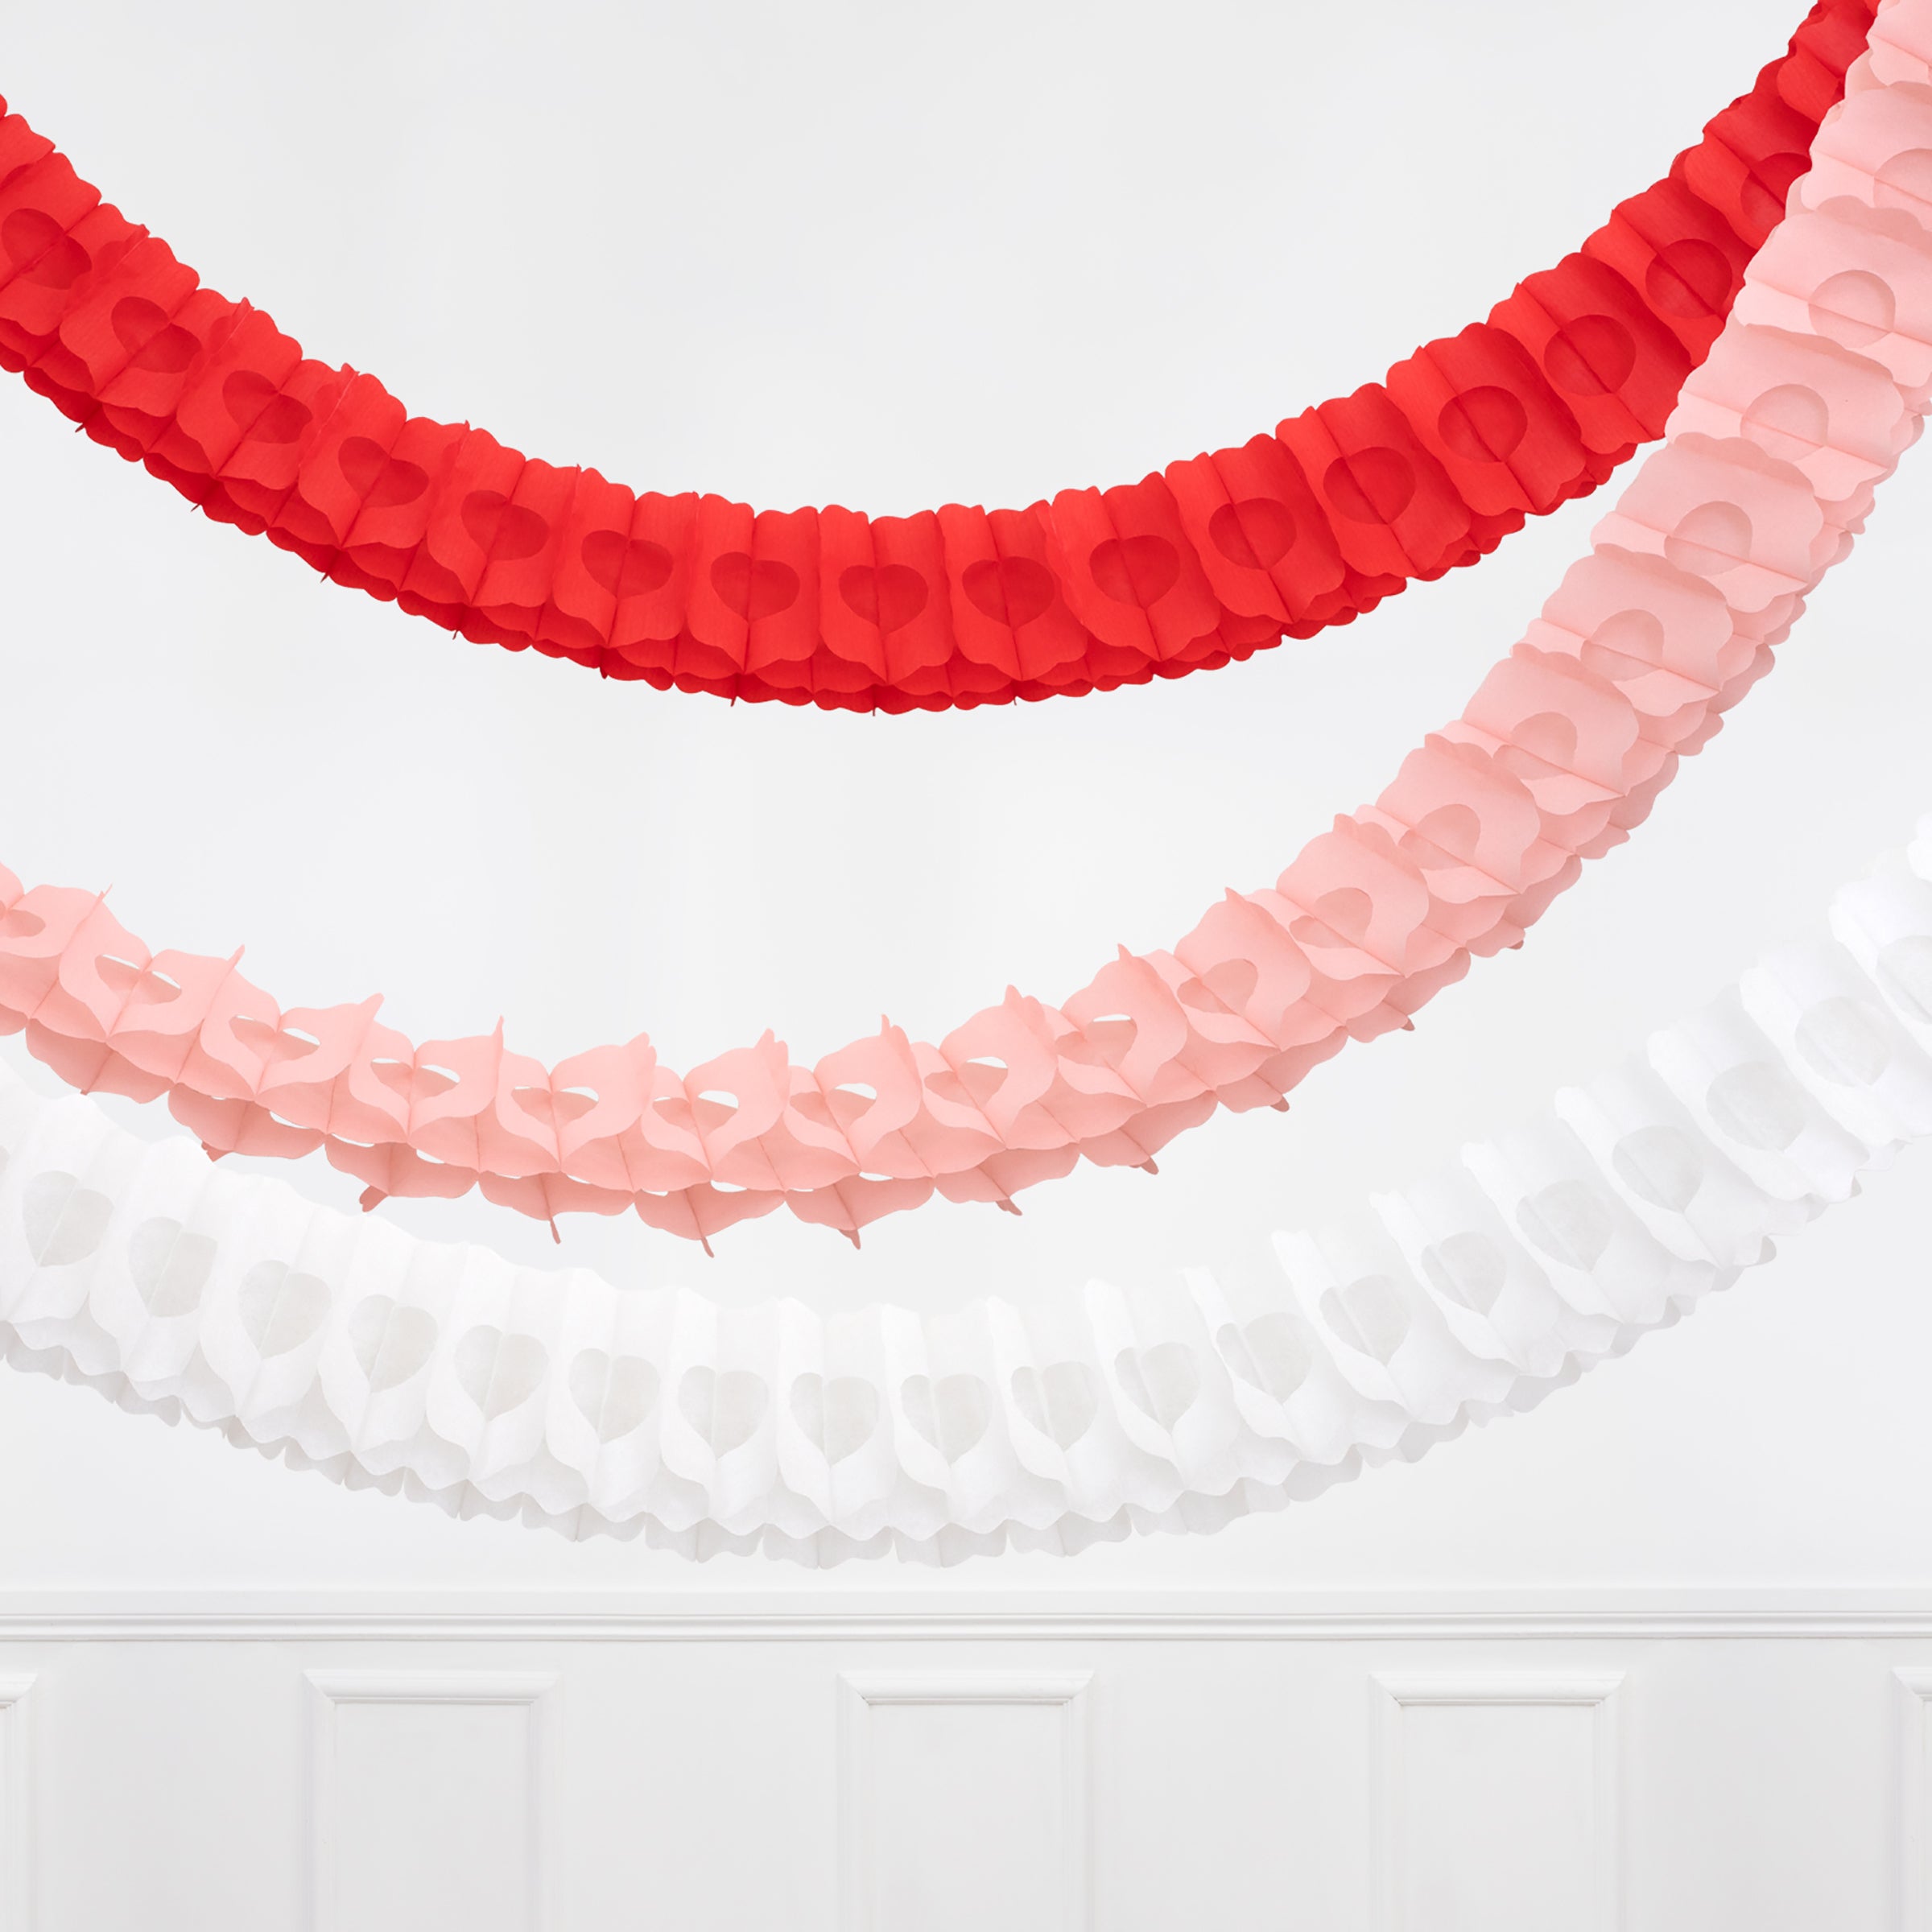 Our large hanging Christmas decorations, three honeycomb garlands in red, white and pink, look amazing.